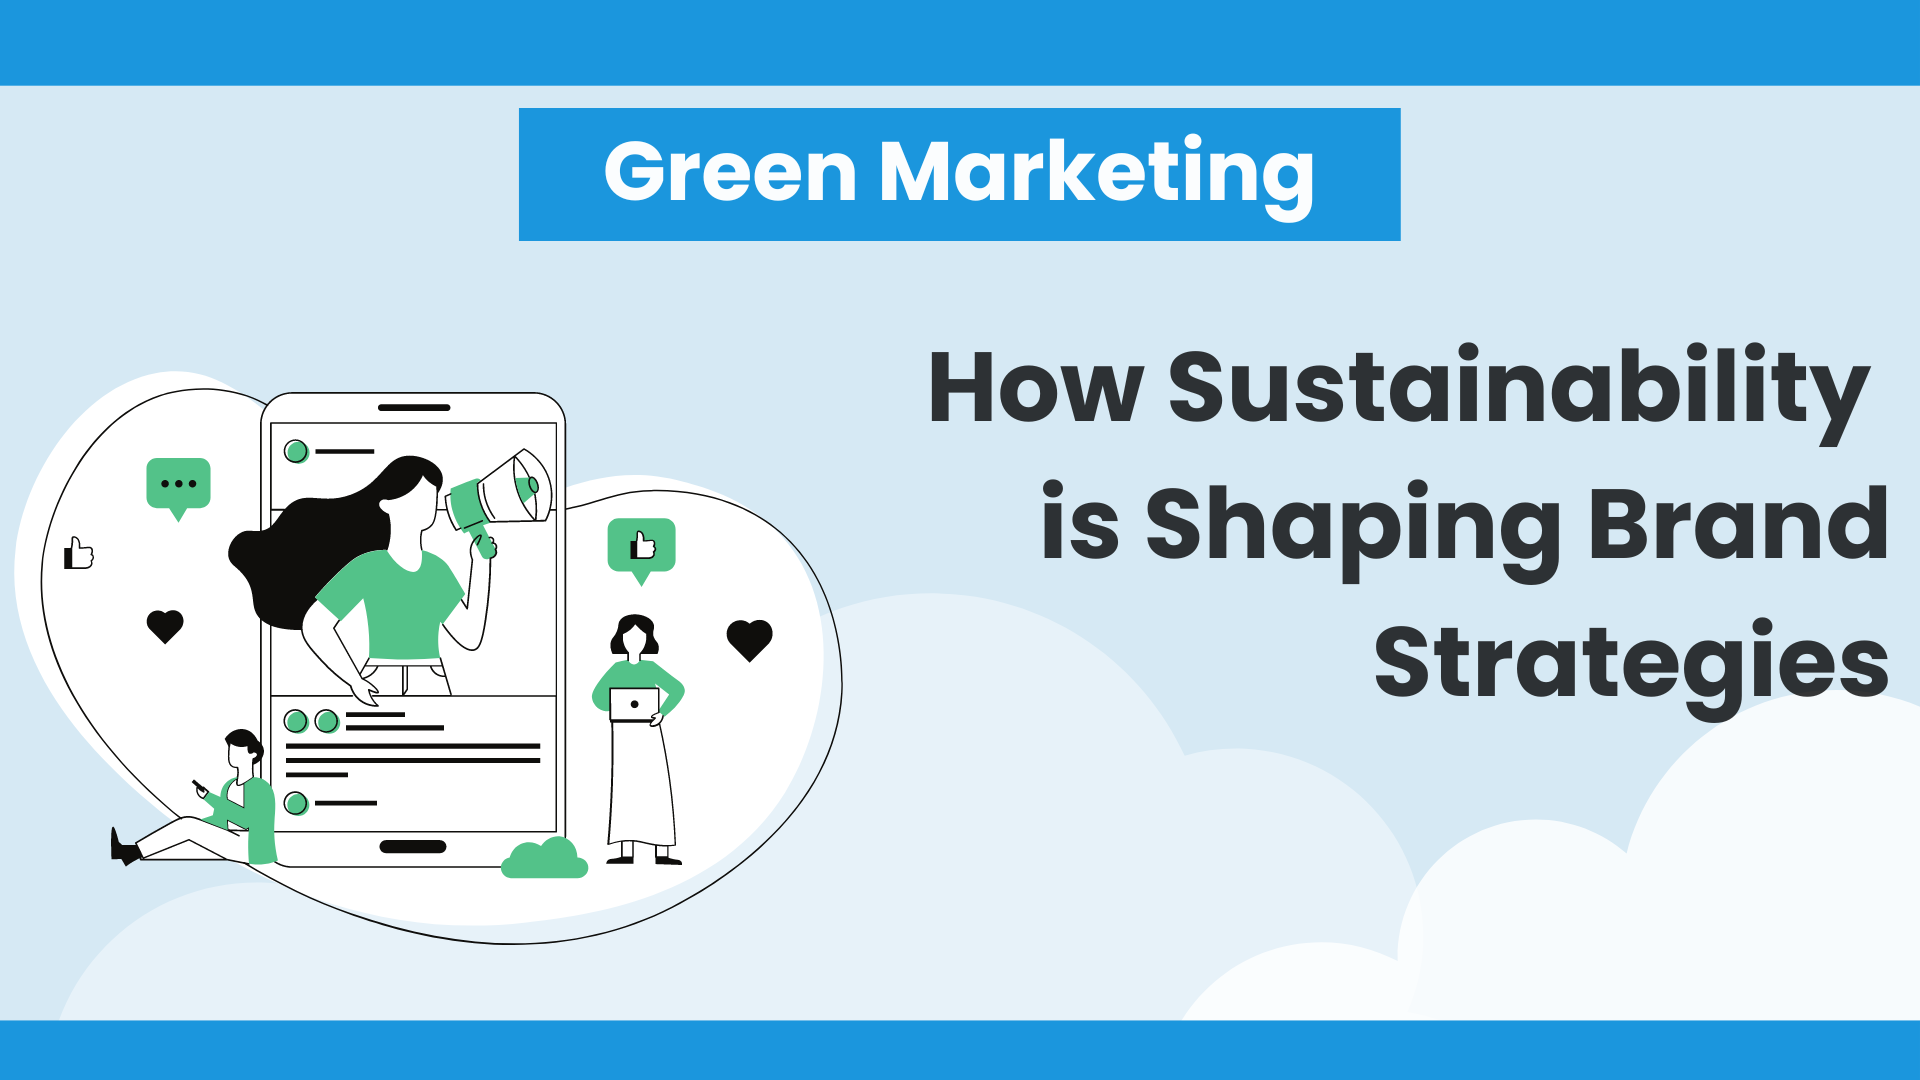 Green Marketing: How Sustainability is Shaping Brand Strategies